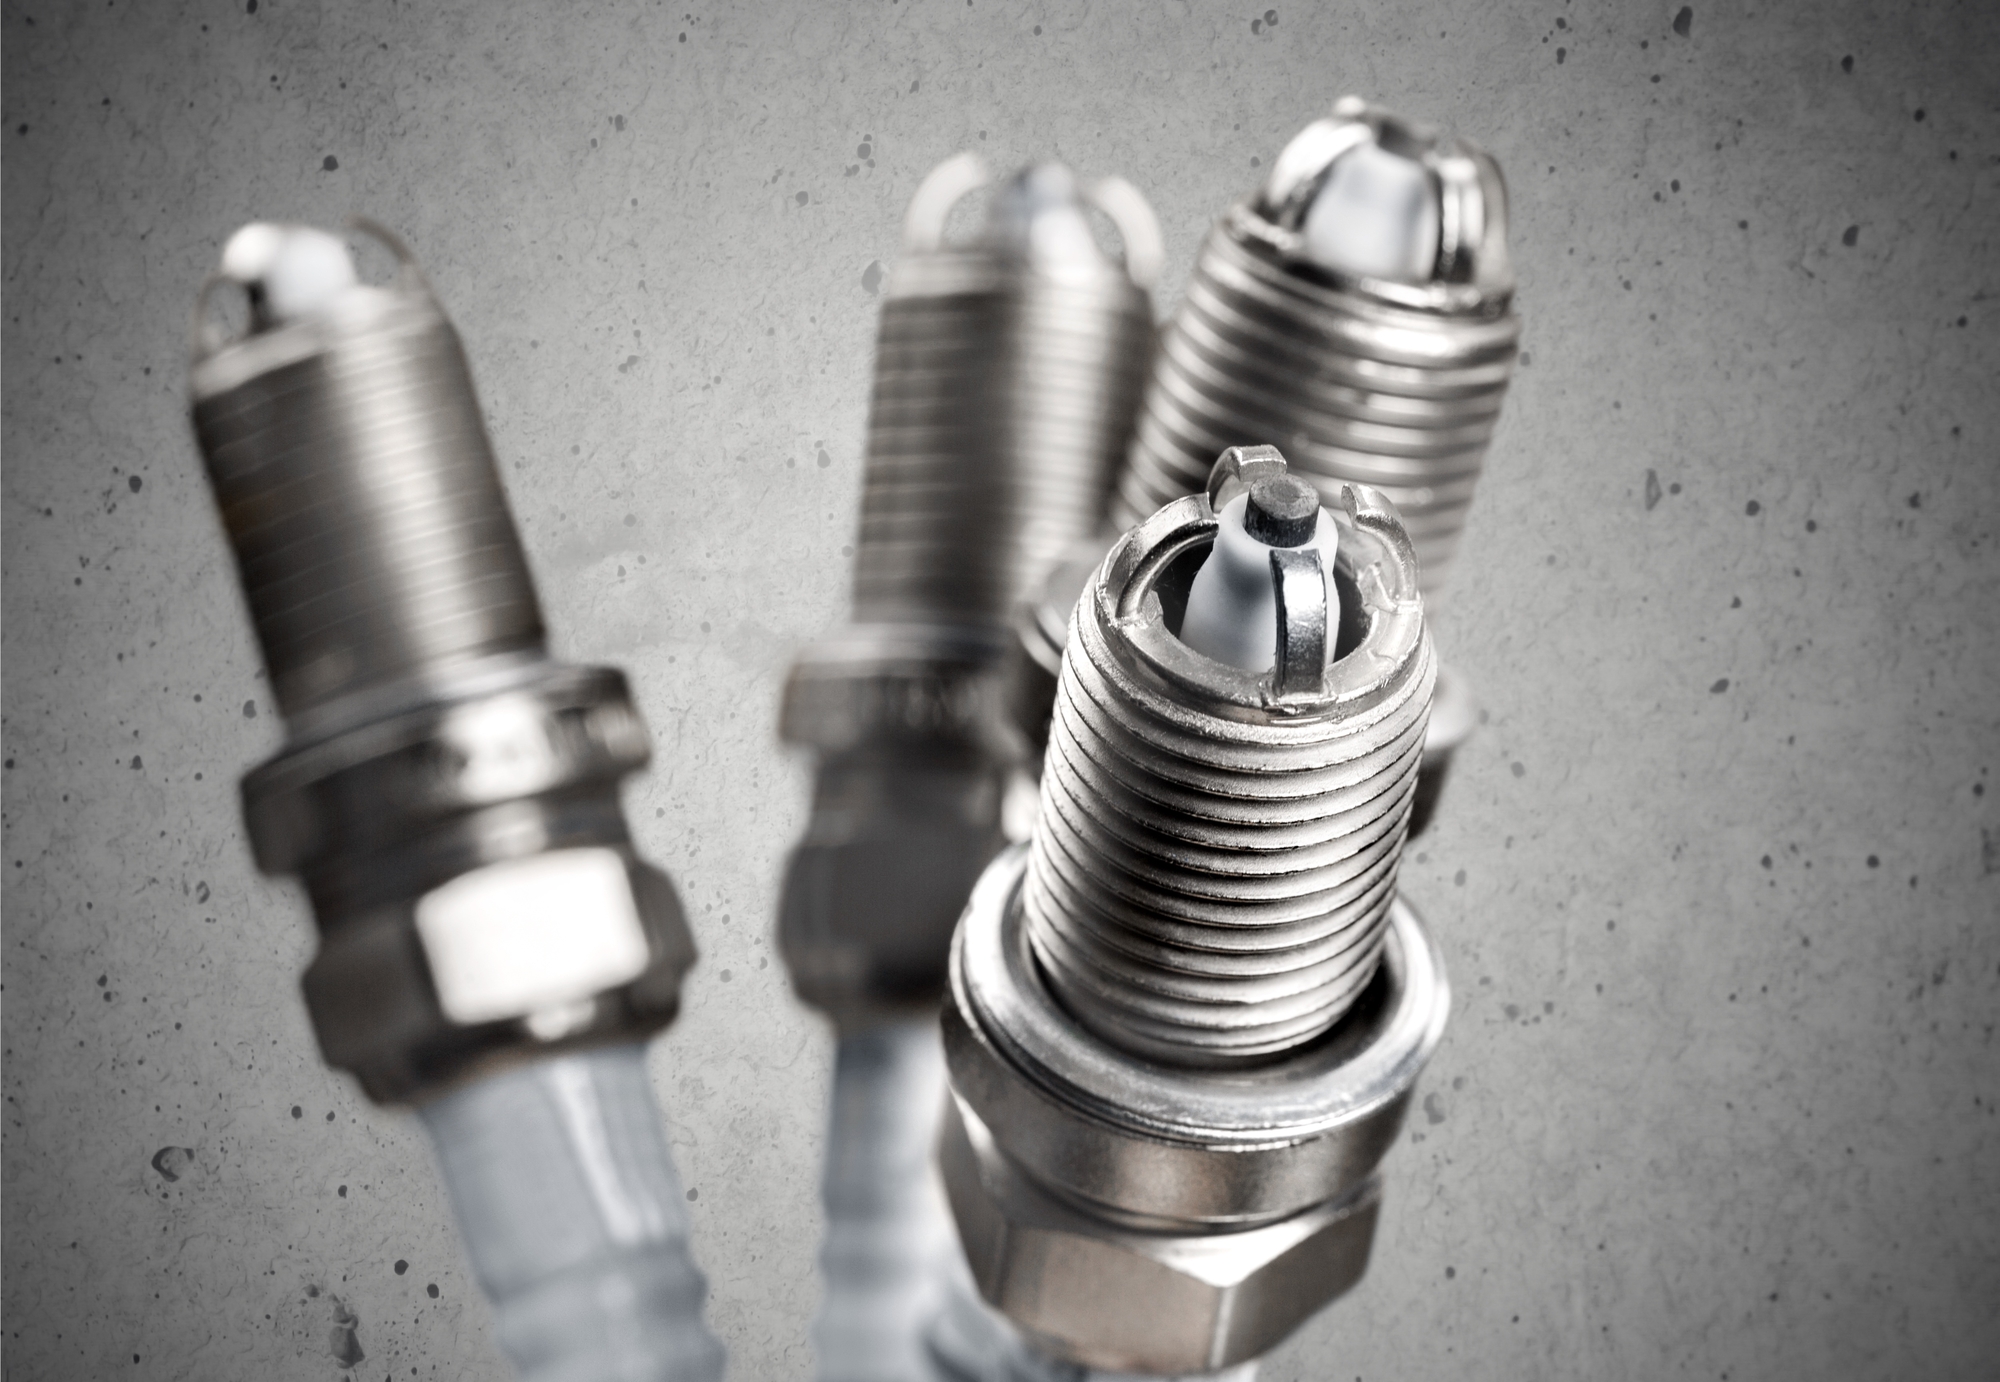 Iridium Spark Plugs Pros Cons And Our Expert s Opinion My Car 